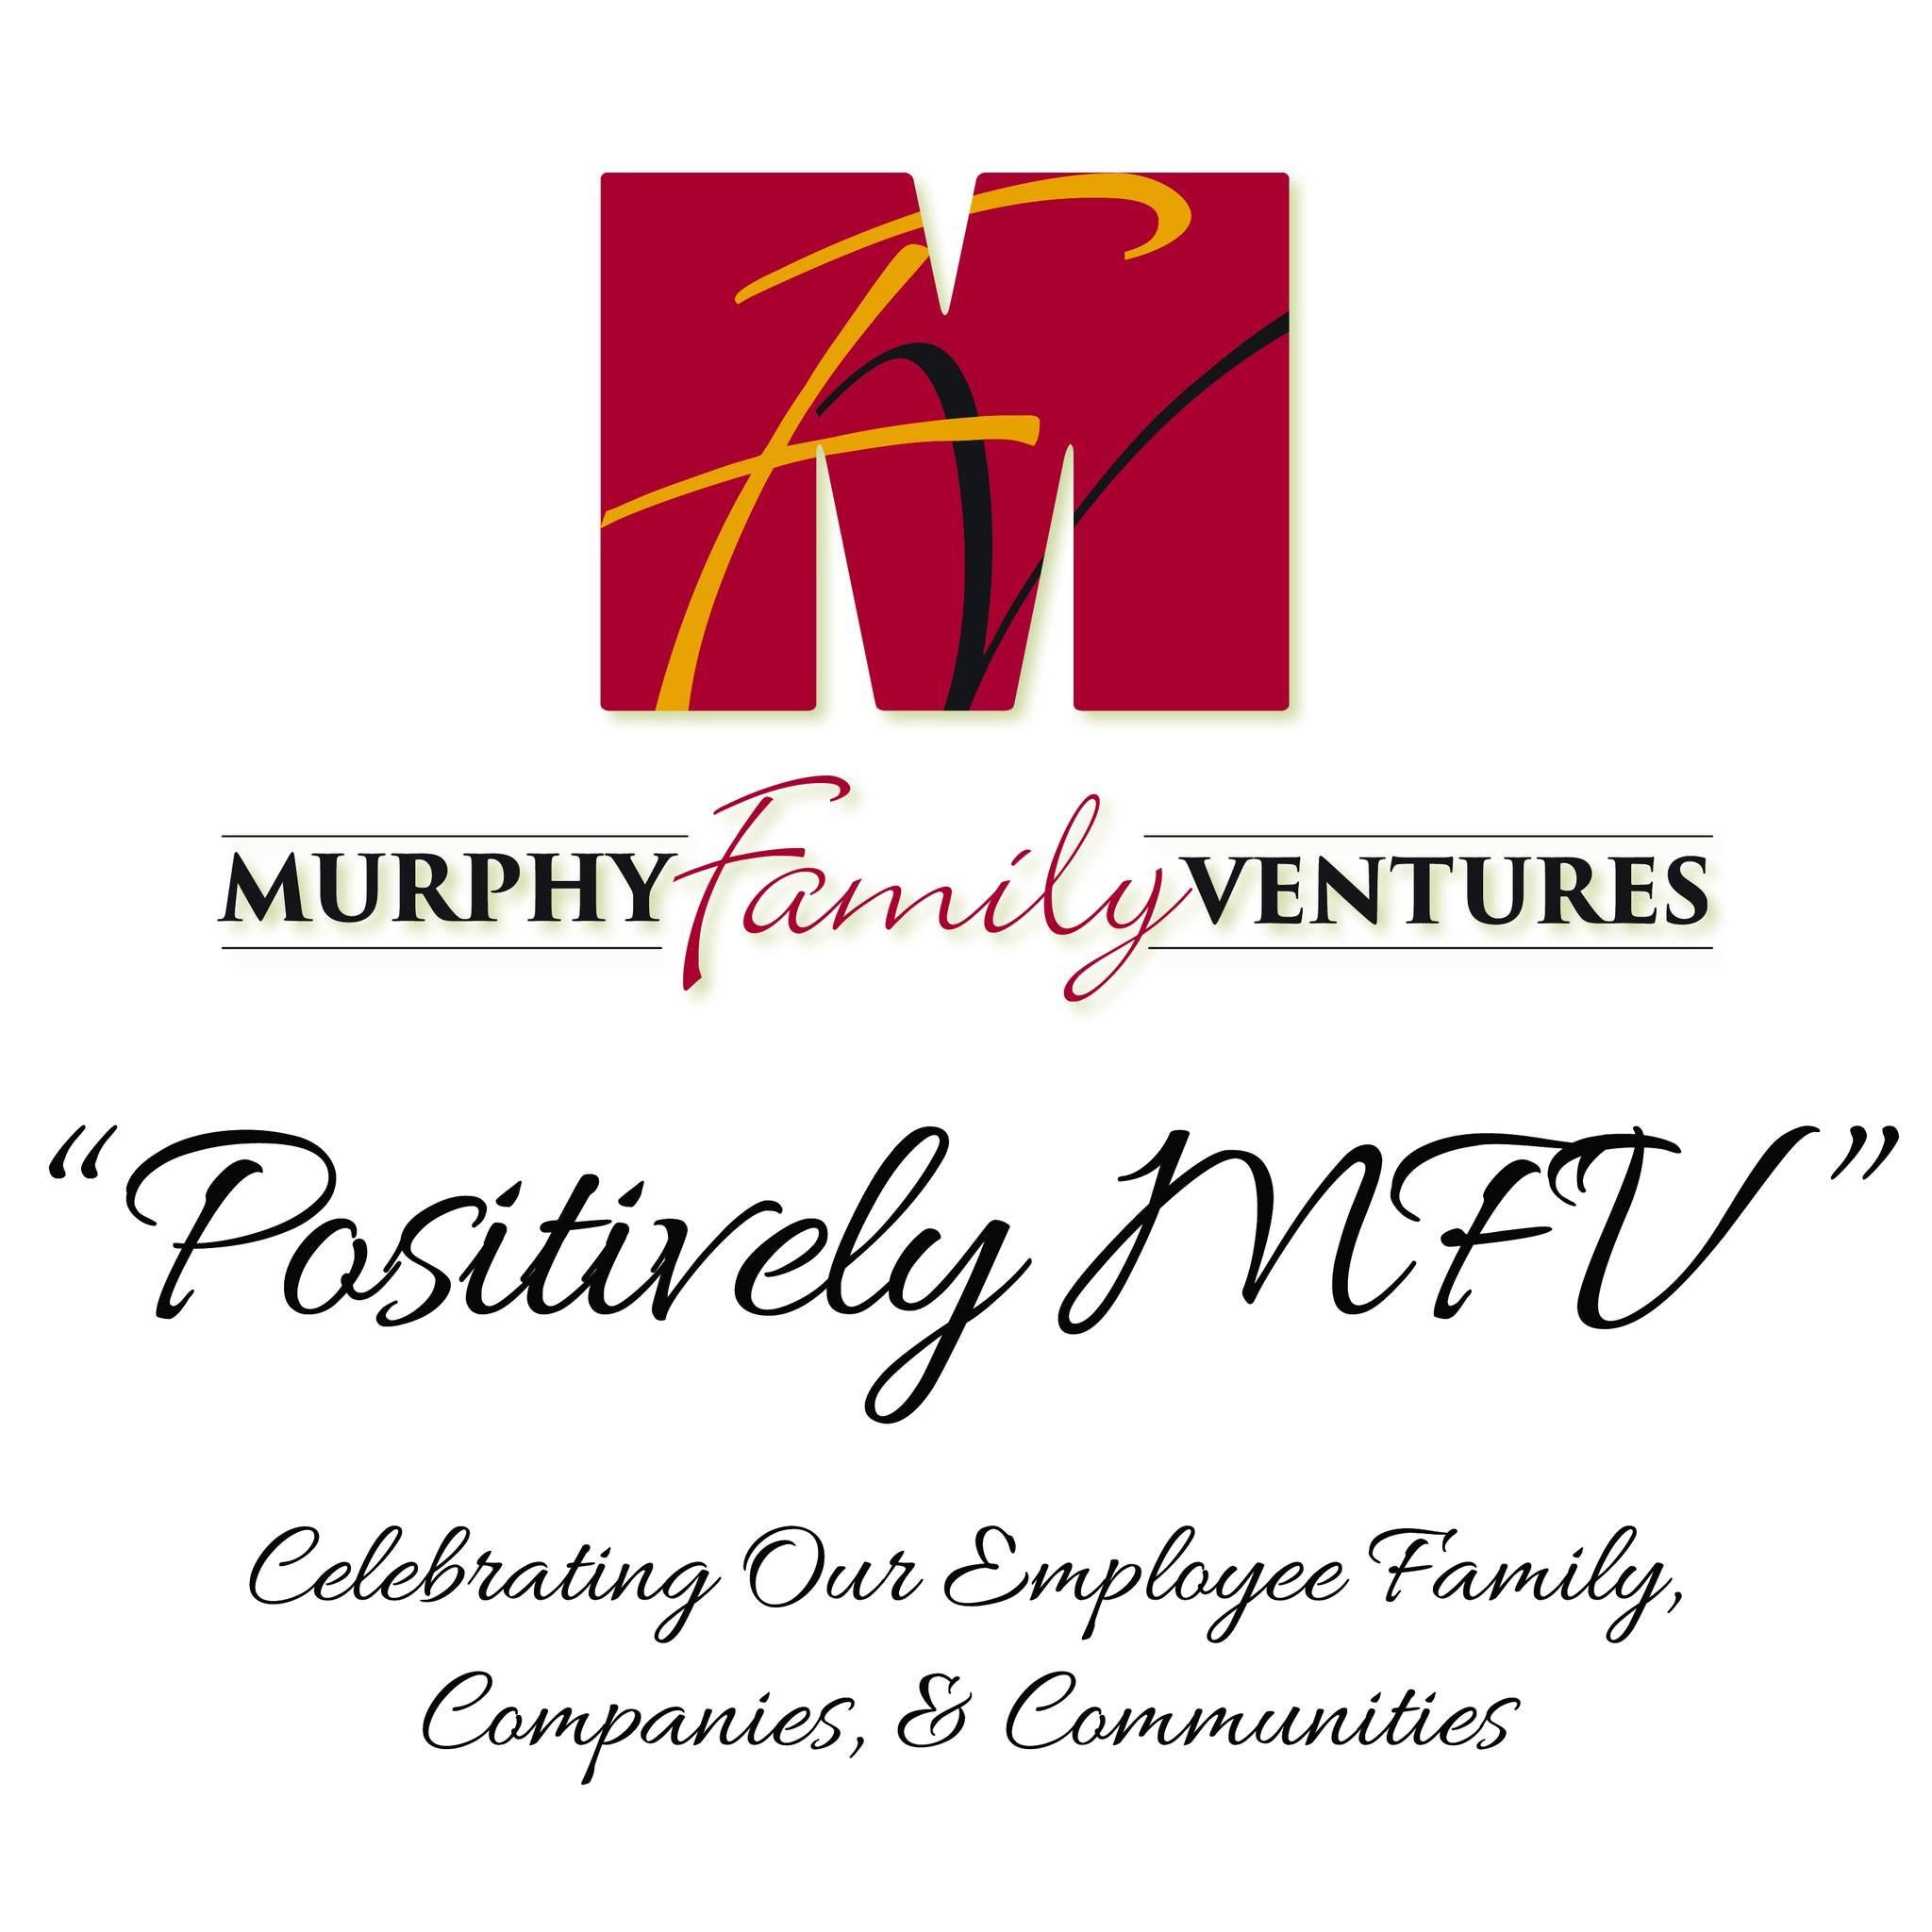 Check out May's edition of Positively MFV to see compliment box winners, two recent promotions, scorecard winners, and more. Visit the link in our bio or https://www.murphyfamilyventures.com/blog to read more.